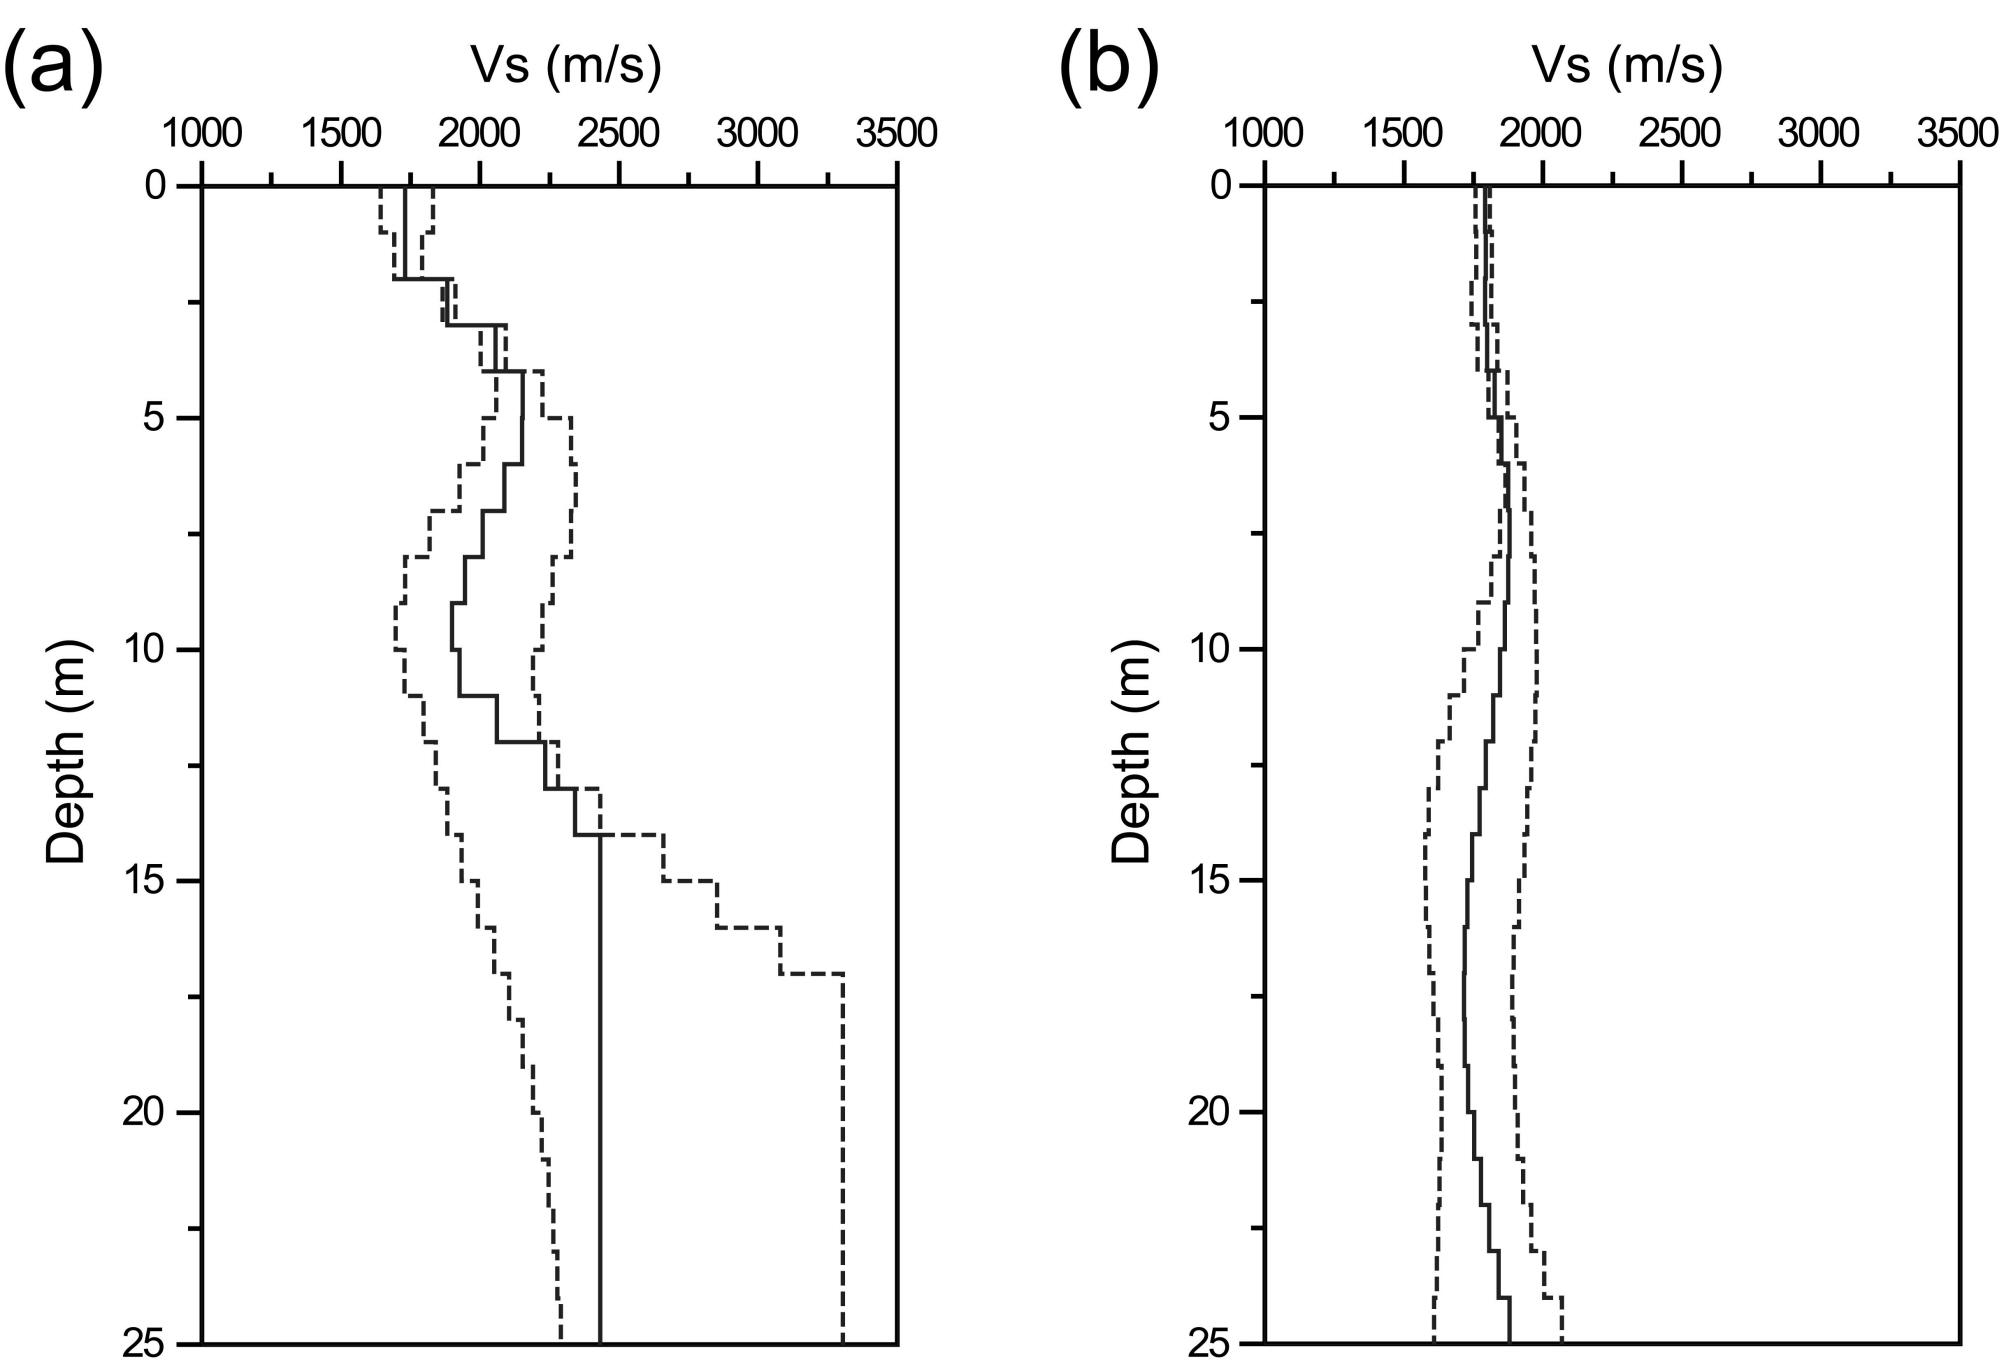 S-wave velocities (Vs) derived from onedimensional inversions of the best-estimate and “offset” Rayleigh wave dispersion curves in Fig. 7c: (a) near the south-west end of the profile where the basement is shallow, and (b) near the profile distance of 365 m where the ice is relatively thick.